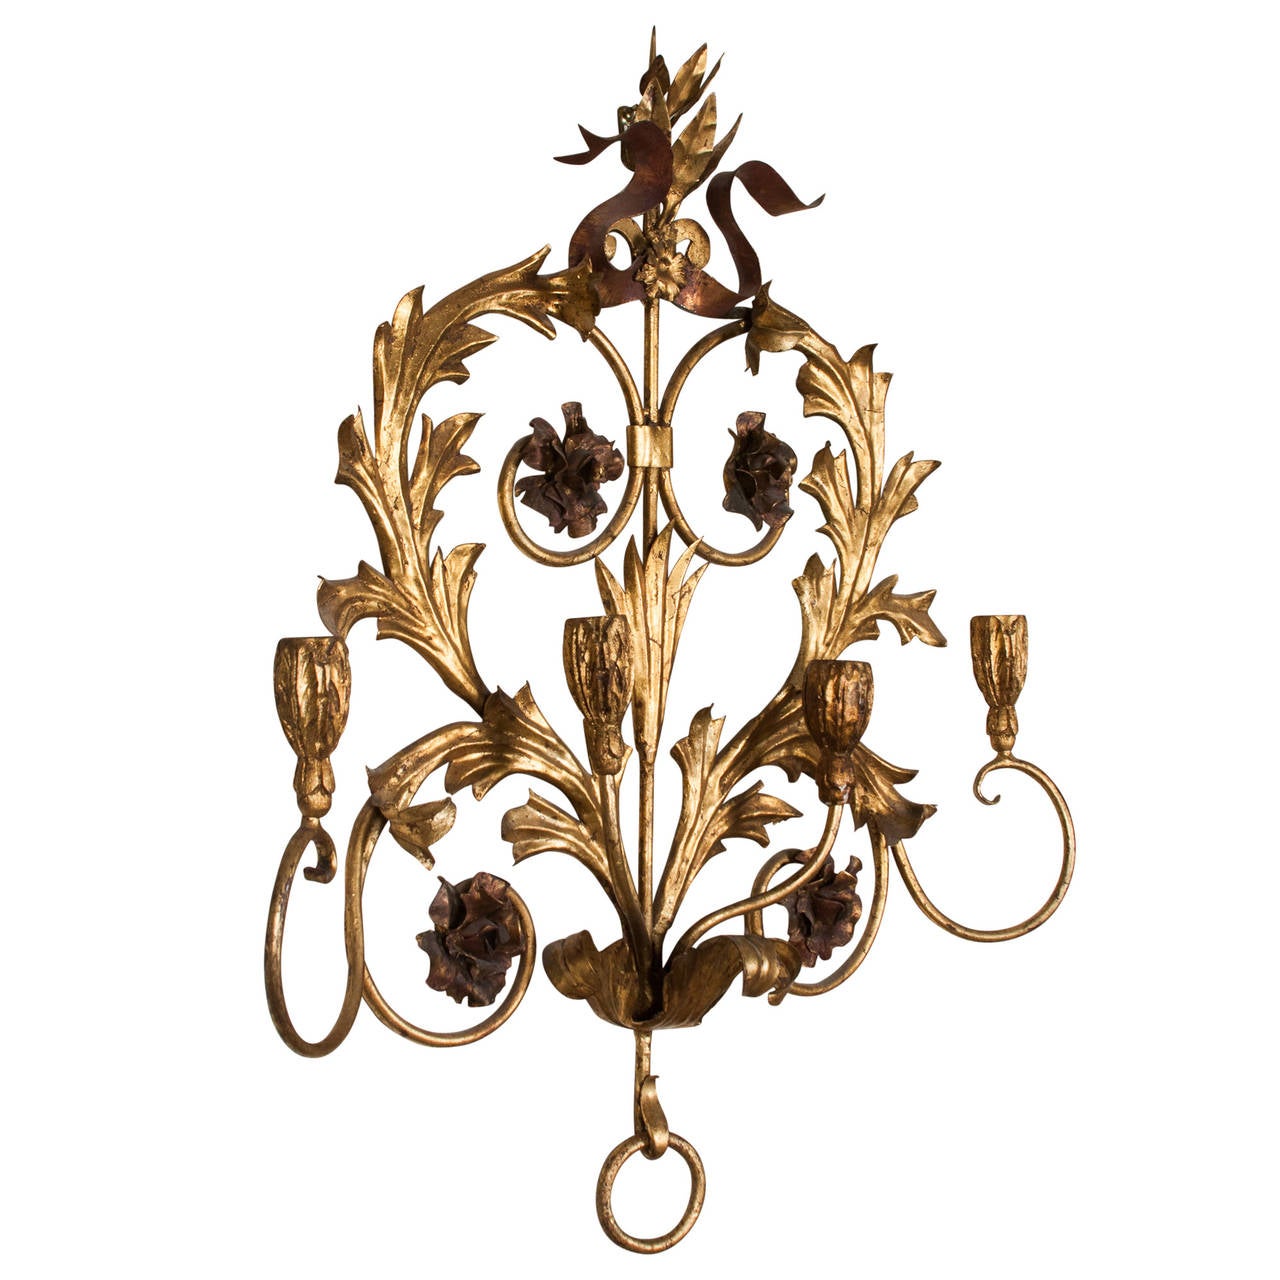 Mid-20th Century Elaborate Floral Gilt Iron Candle Sconce For Sale